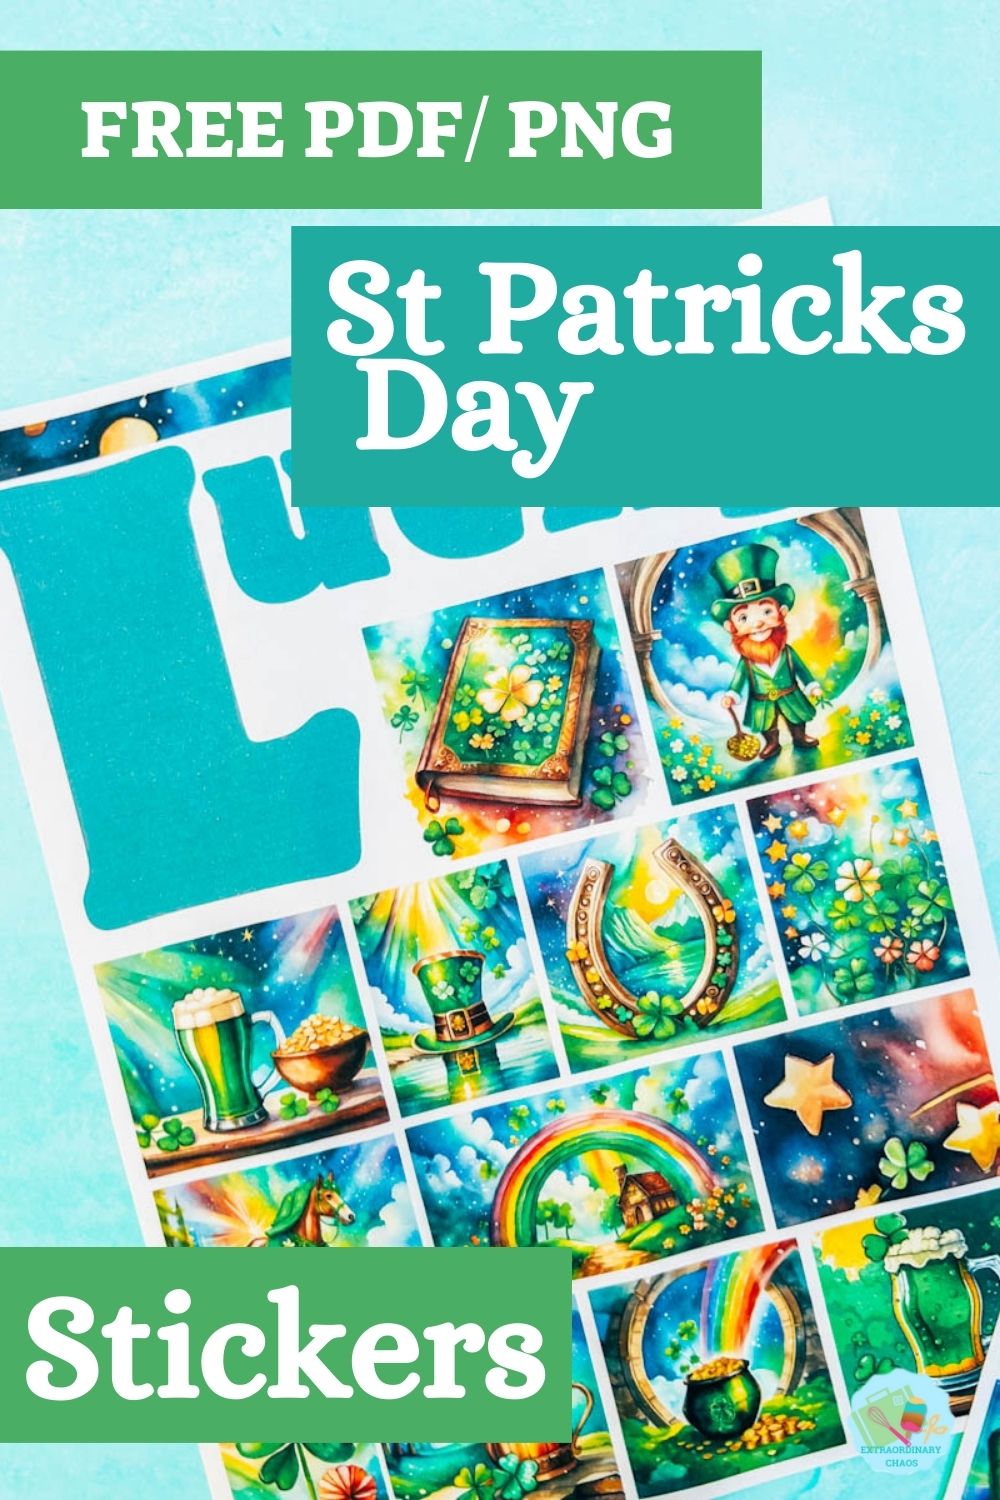 Free PDF PNG St Patricks Day printable Stickers for Cricut and Silhouette